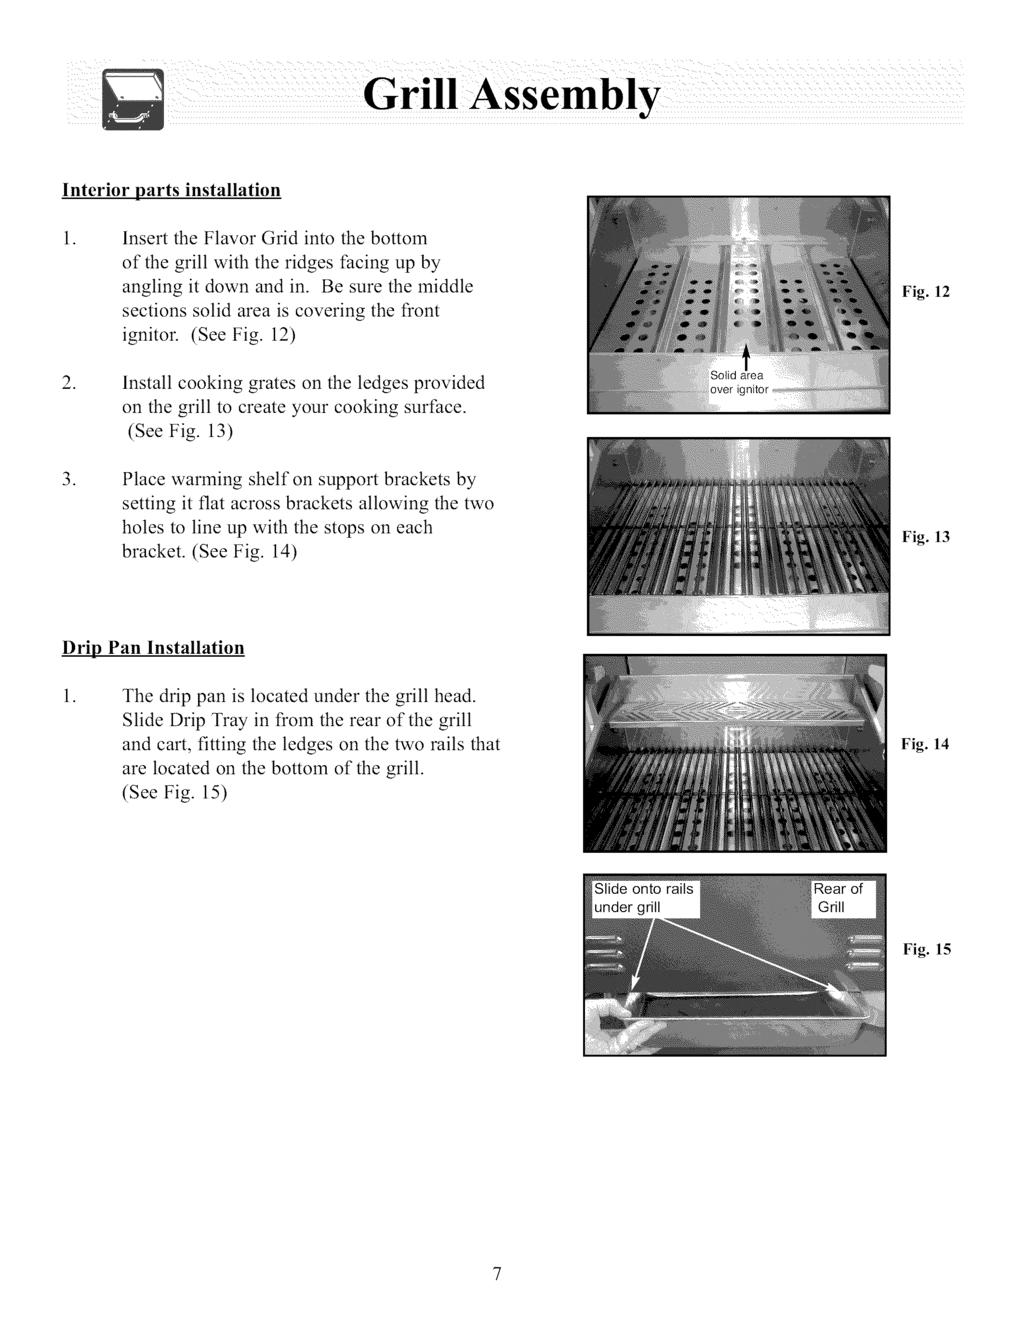 Interior parts installation Insert the Flavor Grid into the bottom of the grill with the ridges facing up by angling it down and in Be sure the middle sections solid area is covering the front